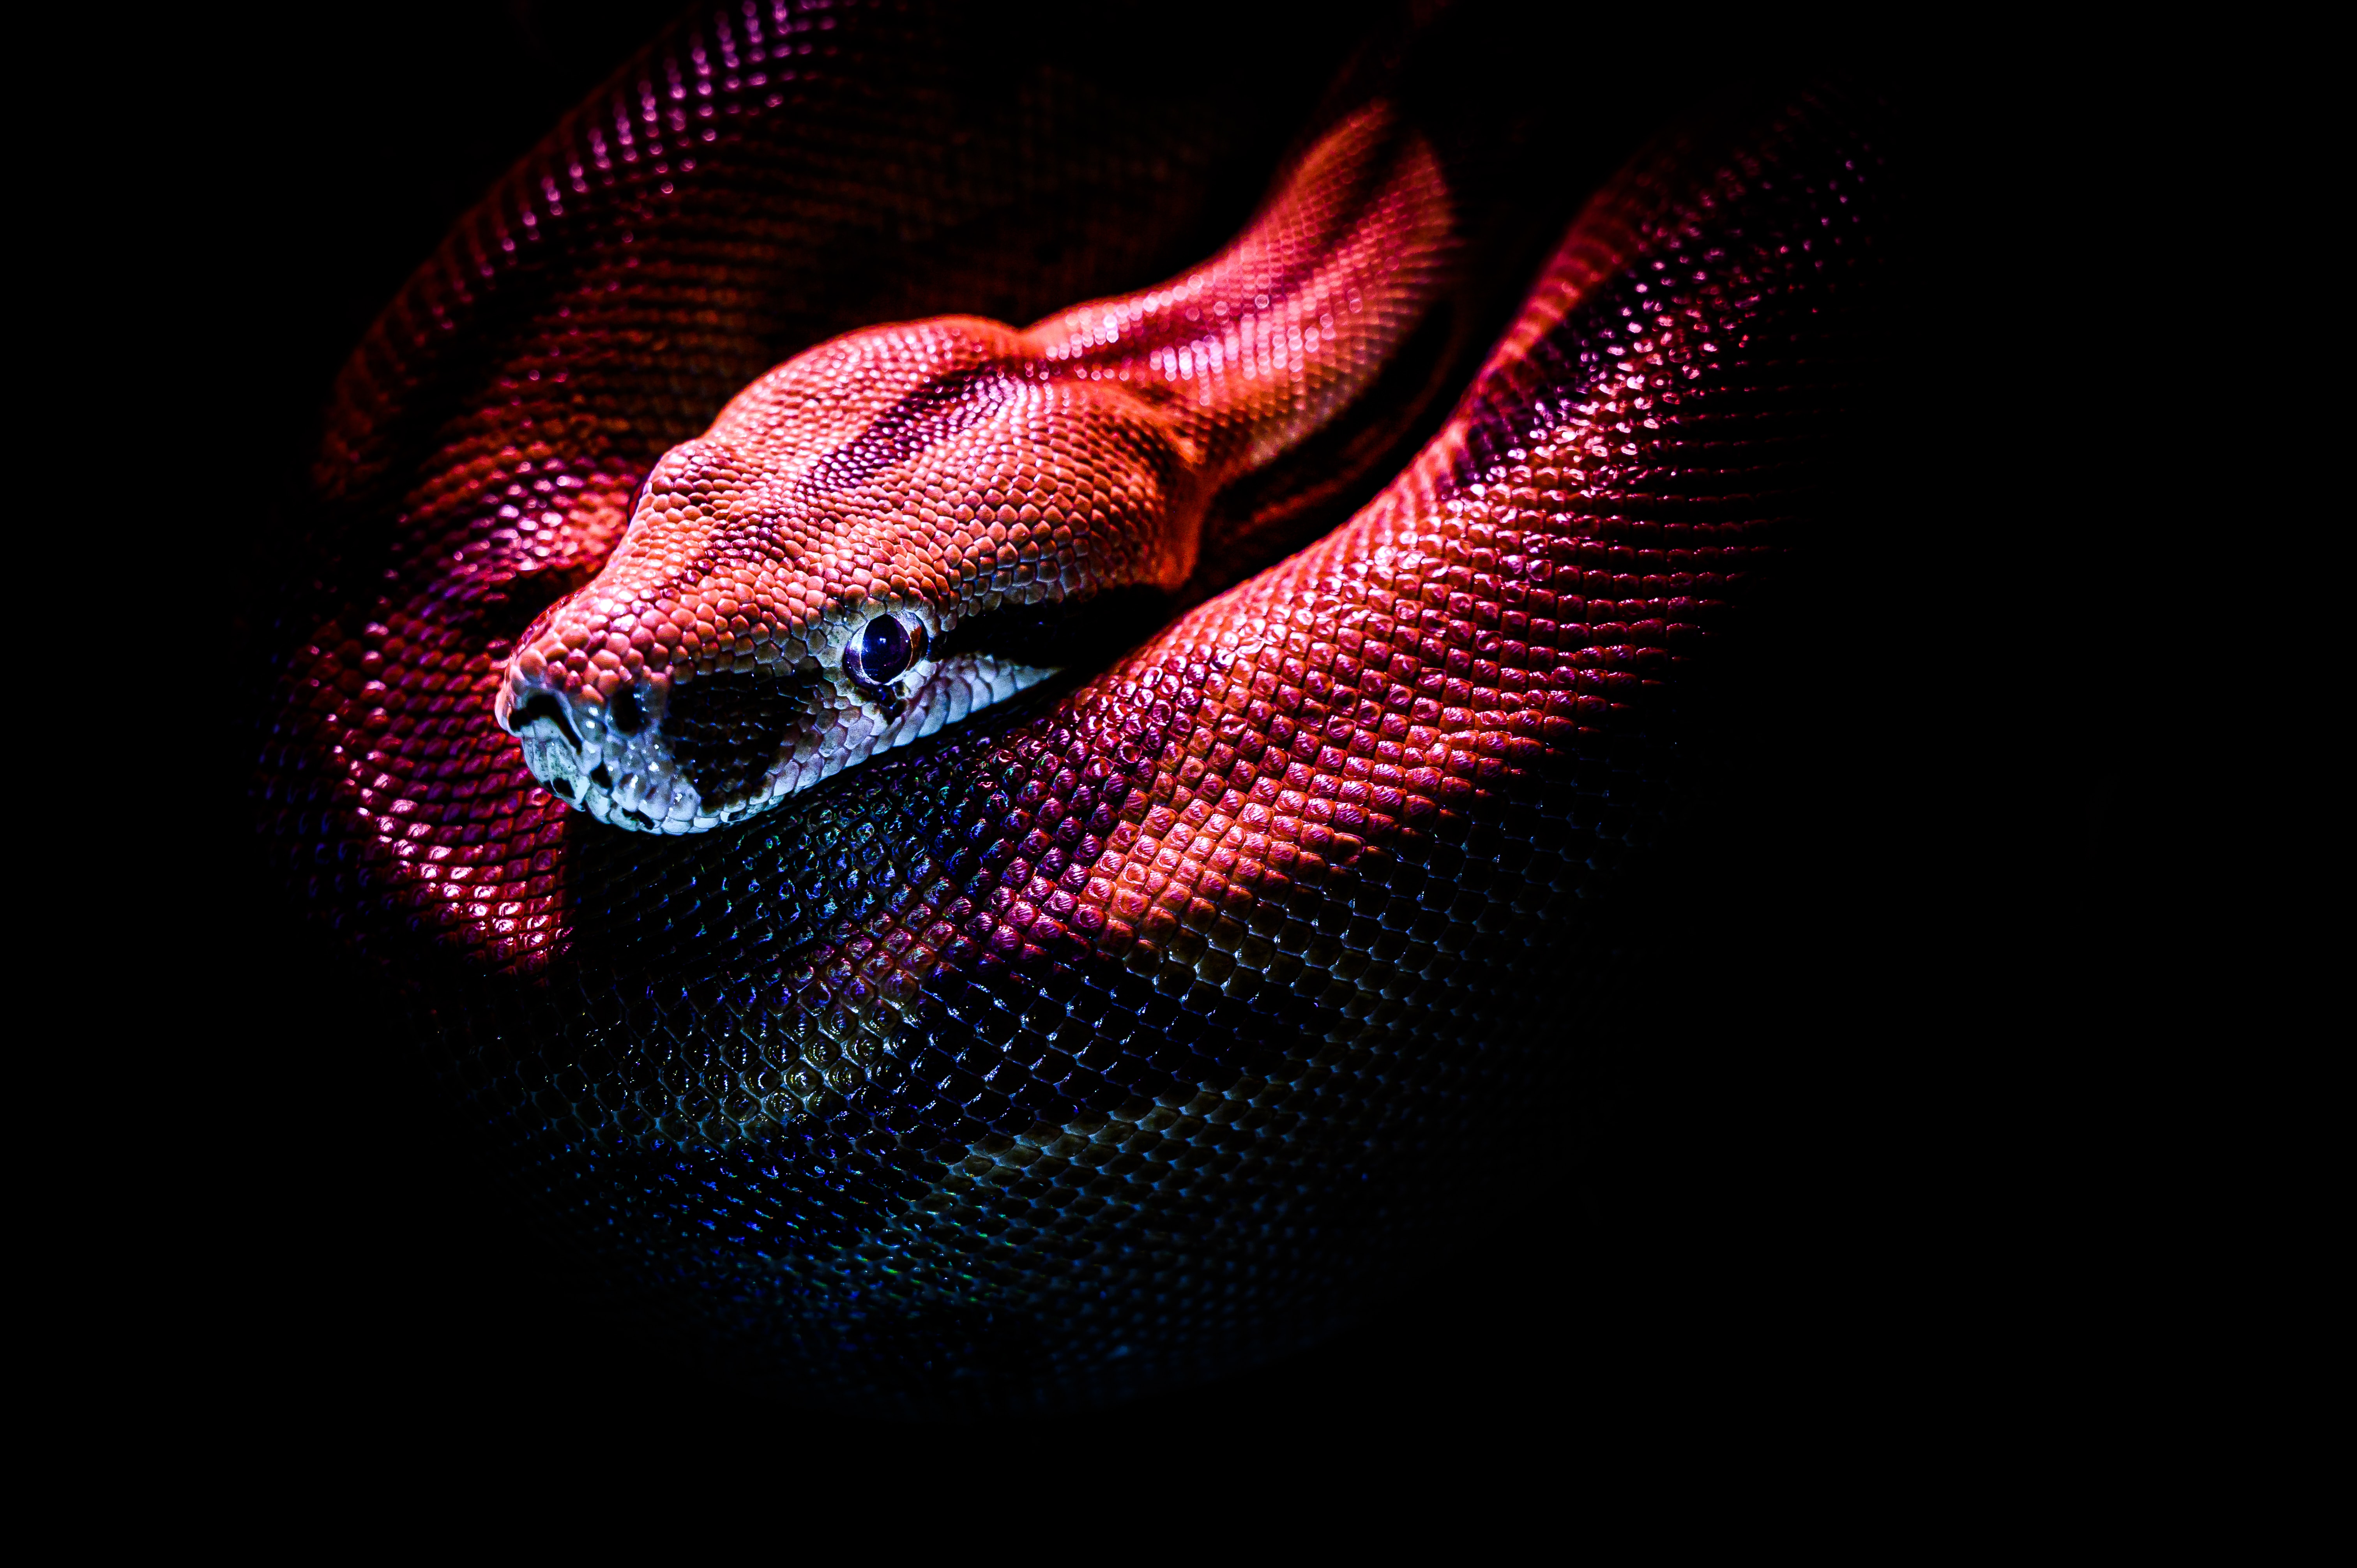 animals, dark, red, reptile, snake, scales, scale